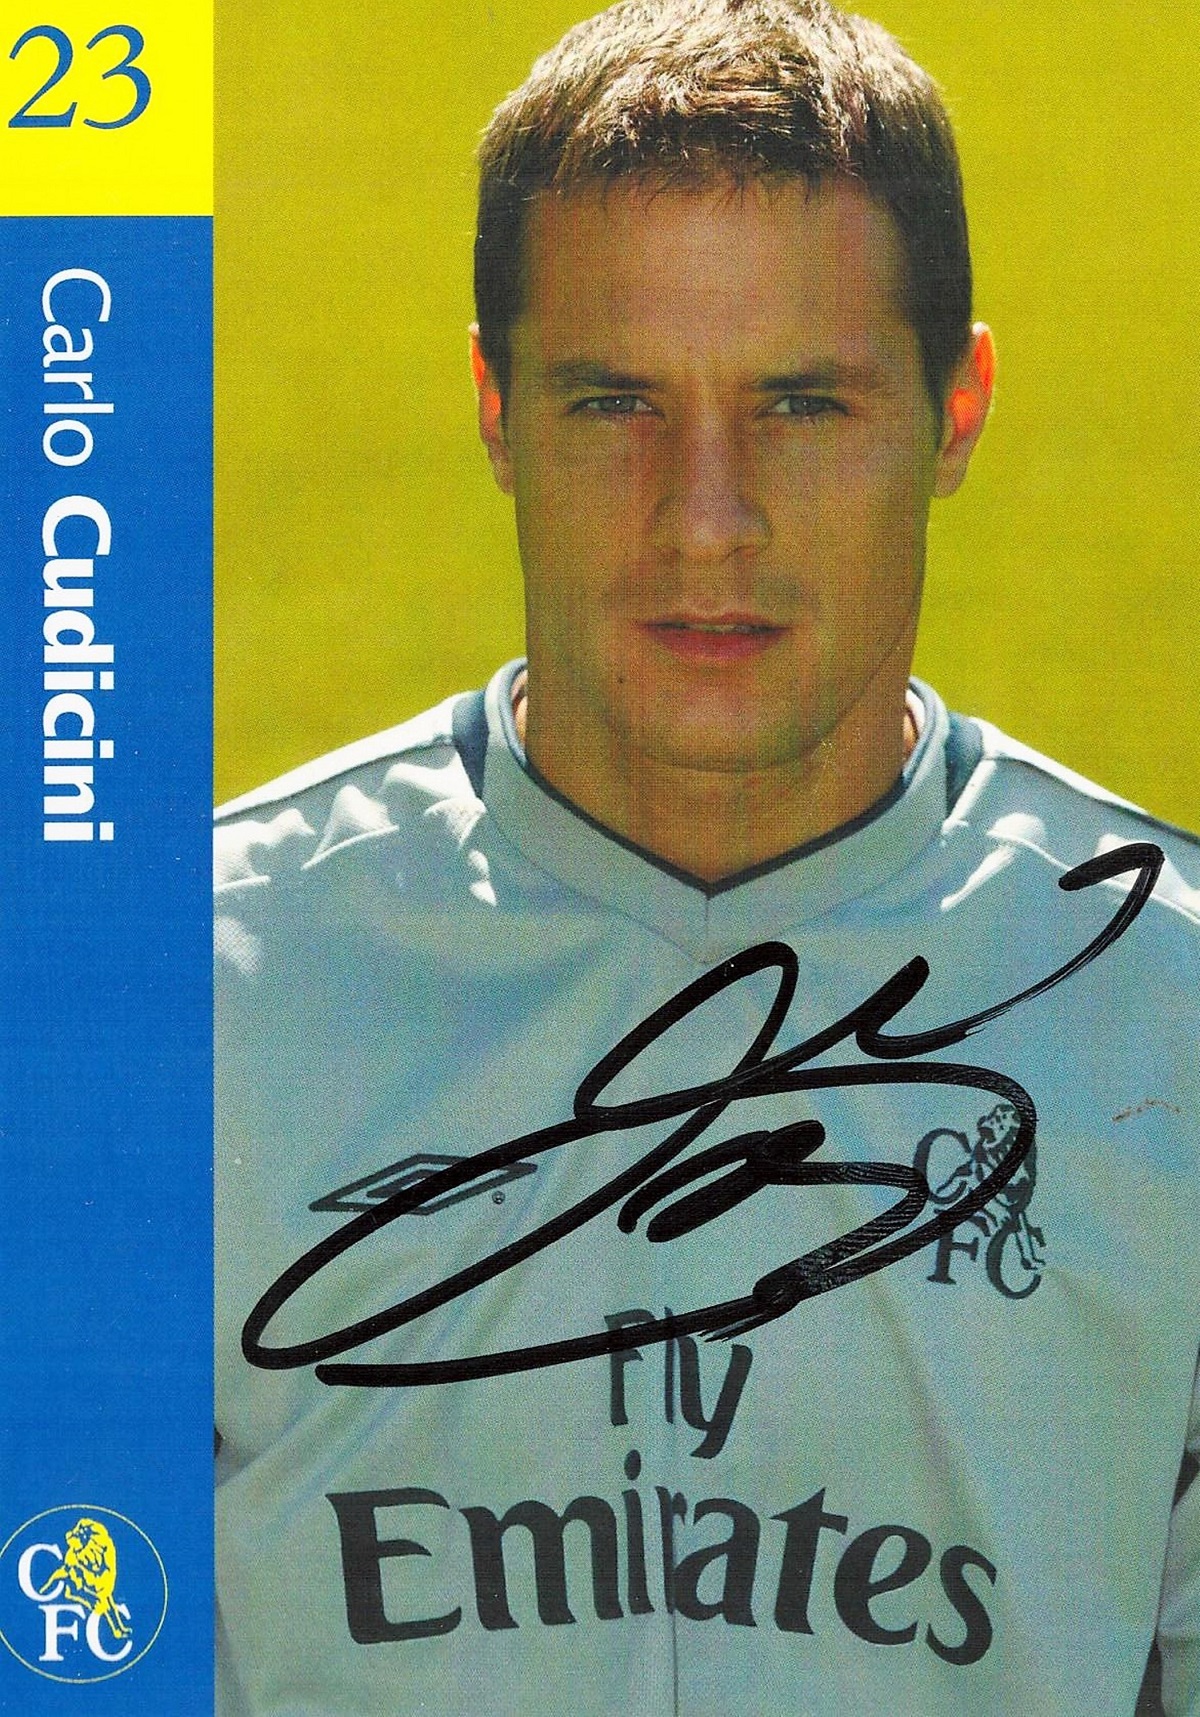 Football. Chelsea. Carlo Cudicini Signed Official Chelsea FC player mounts. 6x5 inches in size. Good